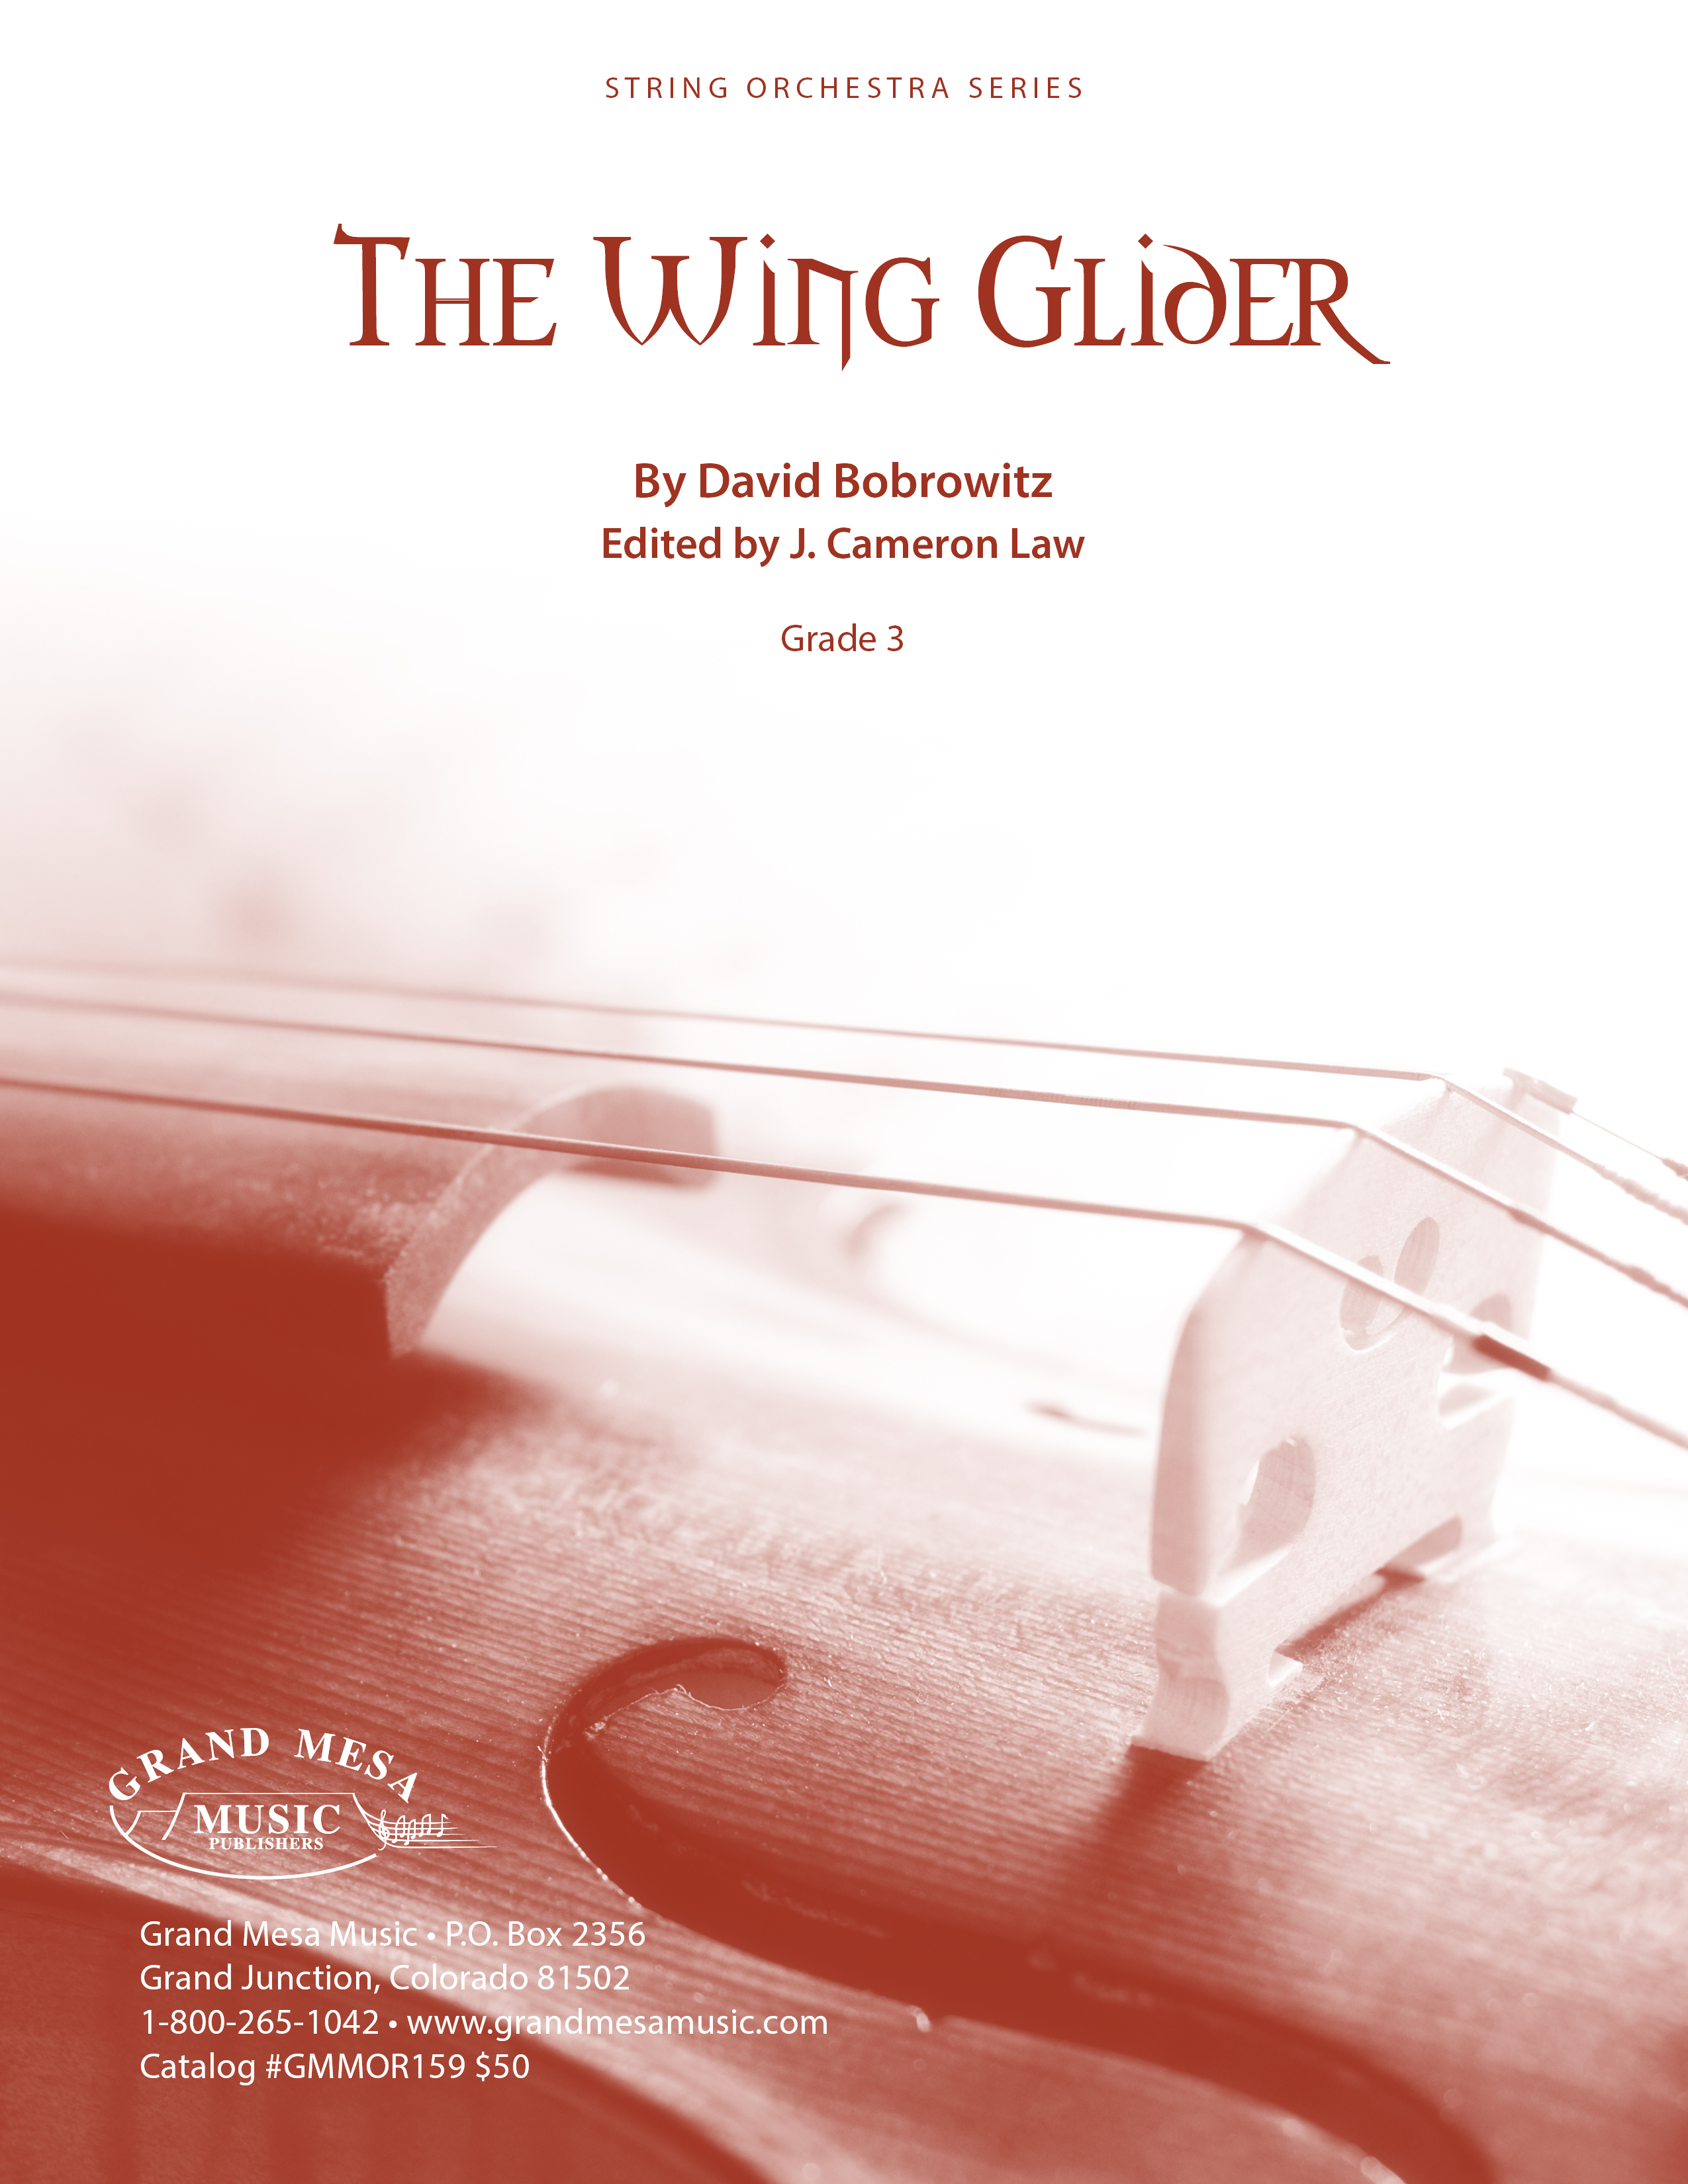 The Wing Glider